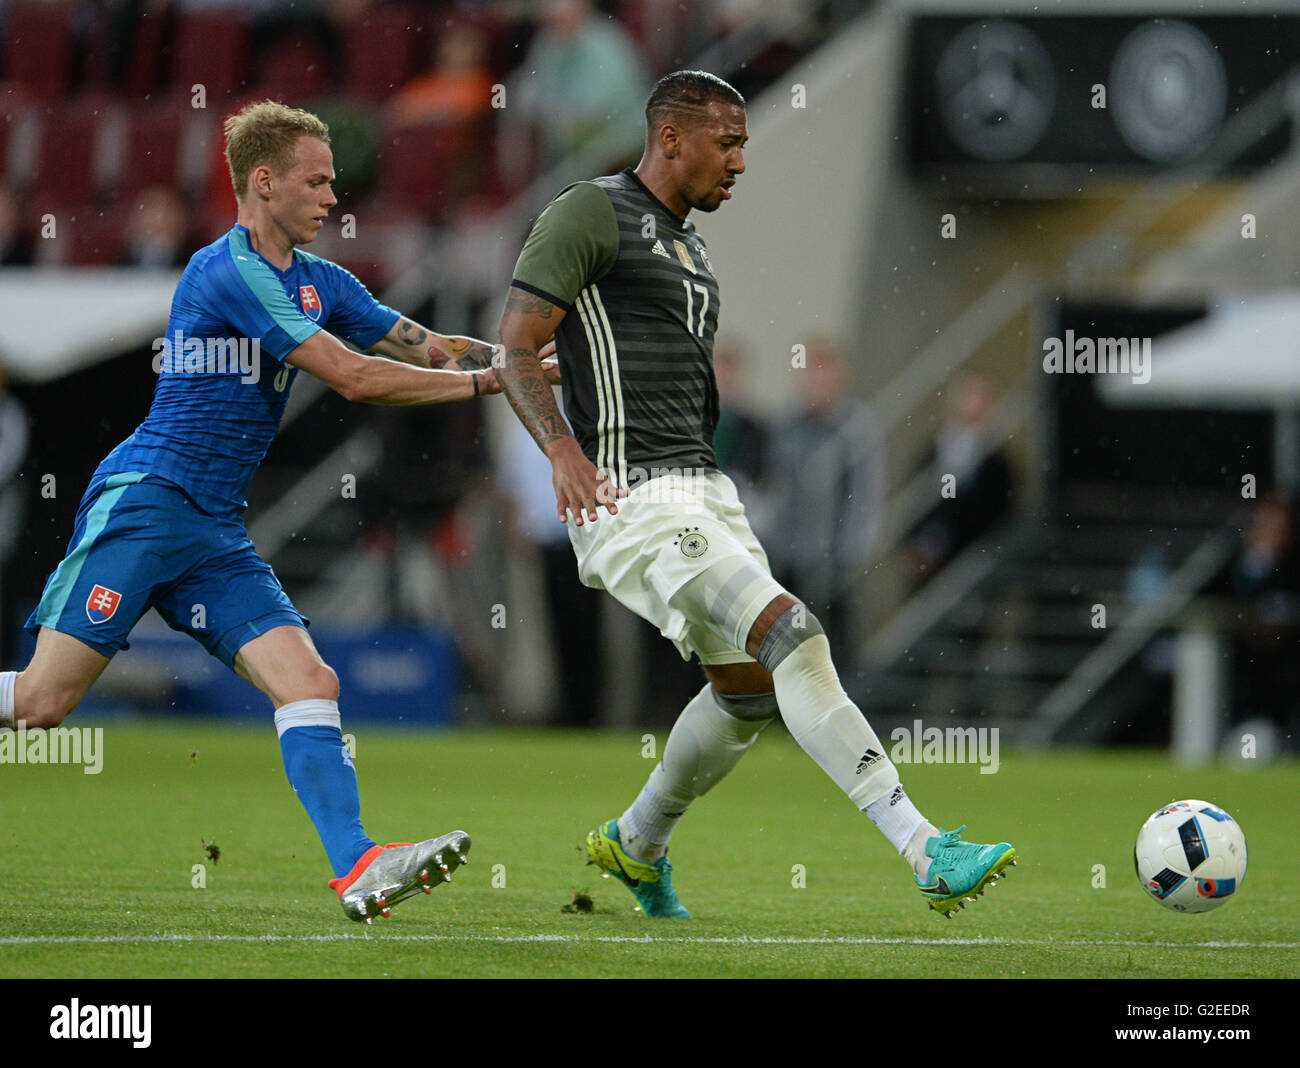 Augsburg, Germany. 29th May, 2016. Germany's Jerome Boateng (r) and Slovakia's Ondrej Duda in action during the international friendly match between Germany and Slovakia at WWK-Arena in Augsburg, Germany, 29 May 2016. PHOTO: ANDREAS GEBERT/dpa/Alamy Live News Stock Photo